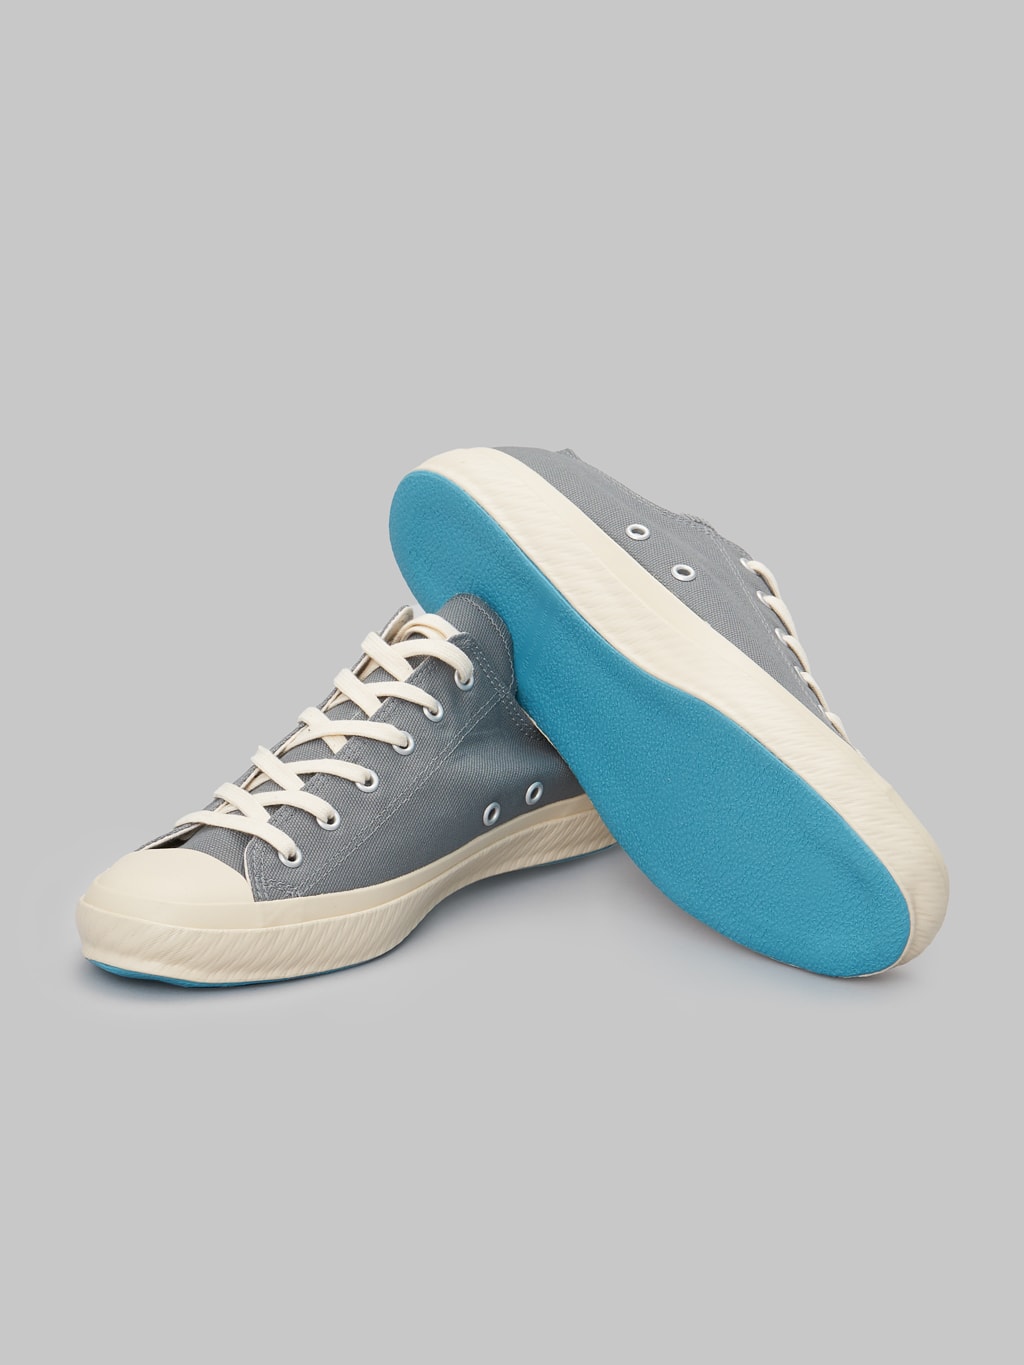 Shoes like pottery low grey sneakers vulcanized soles